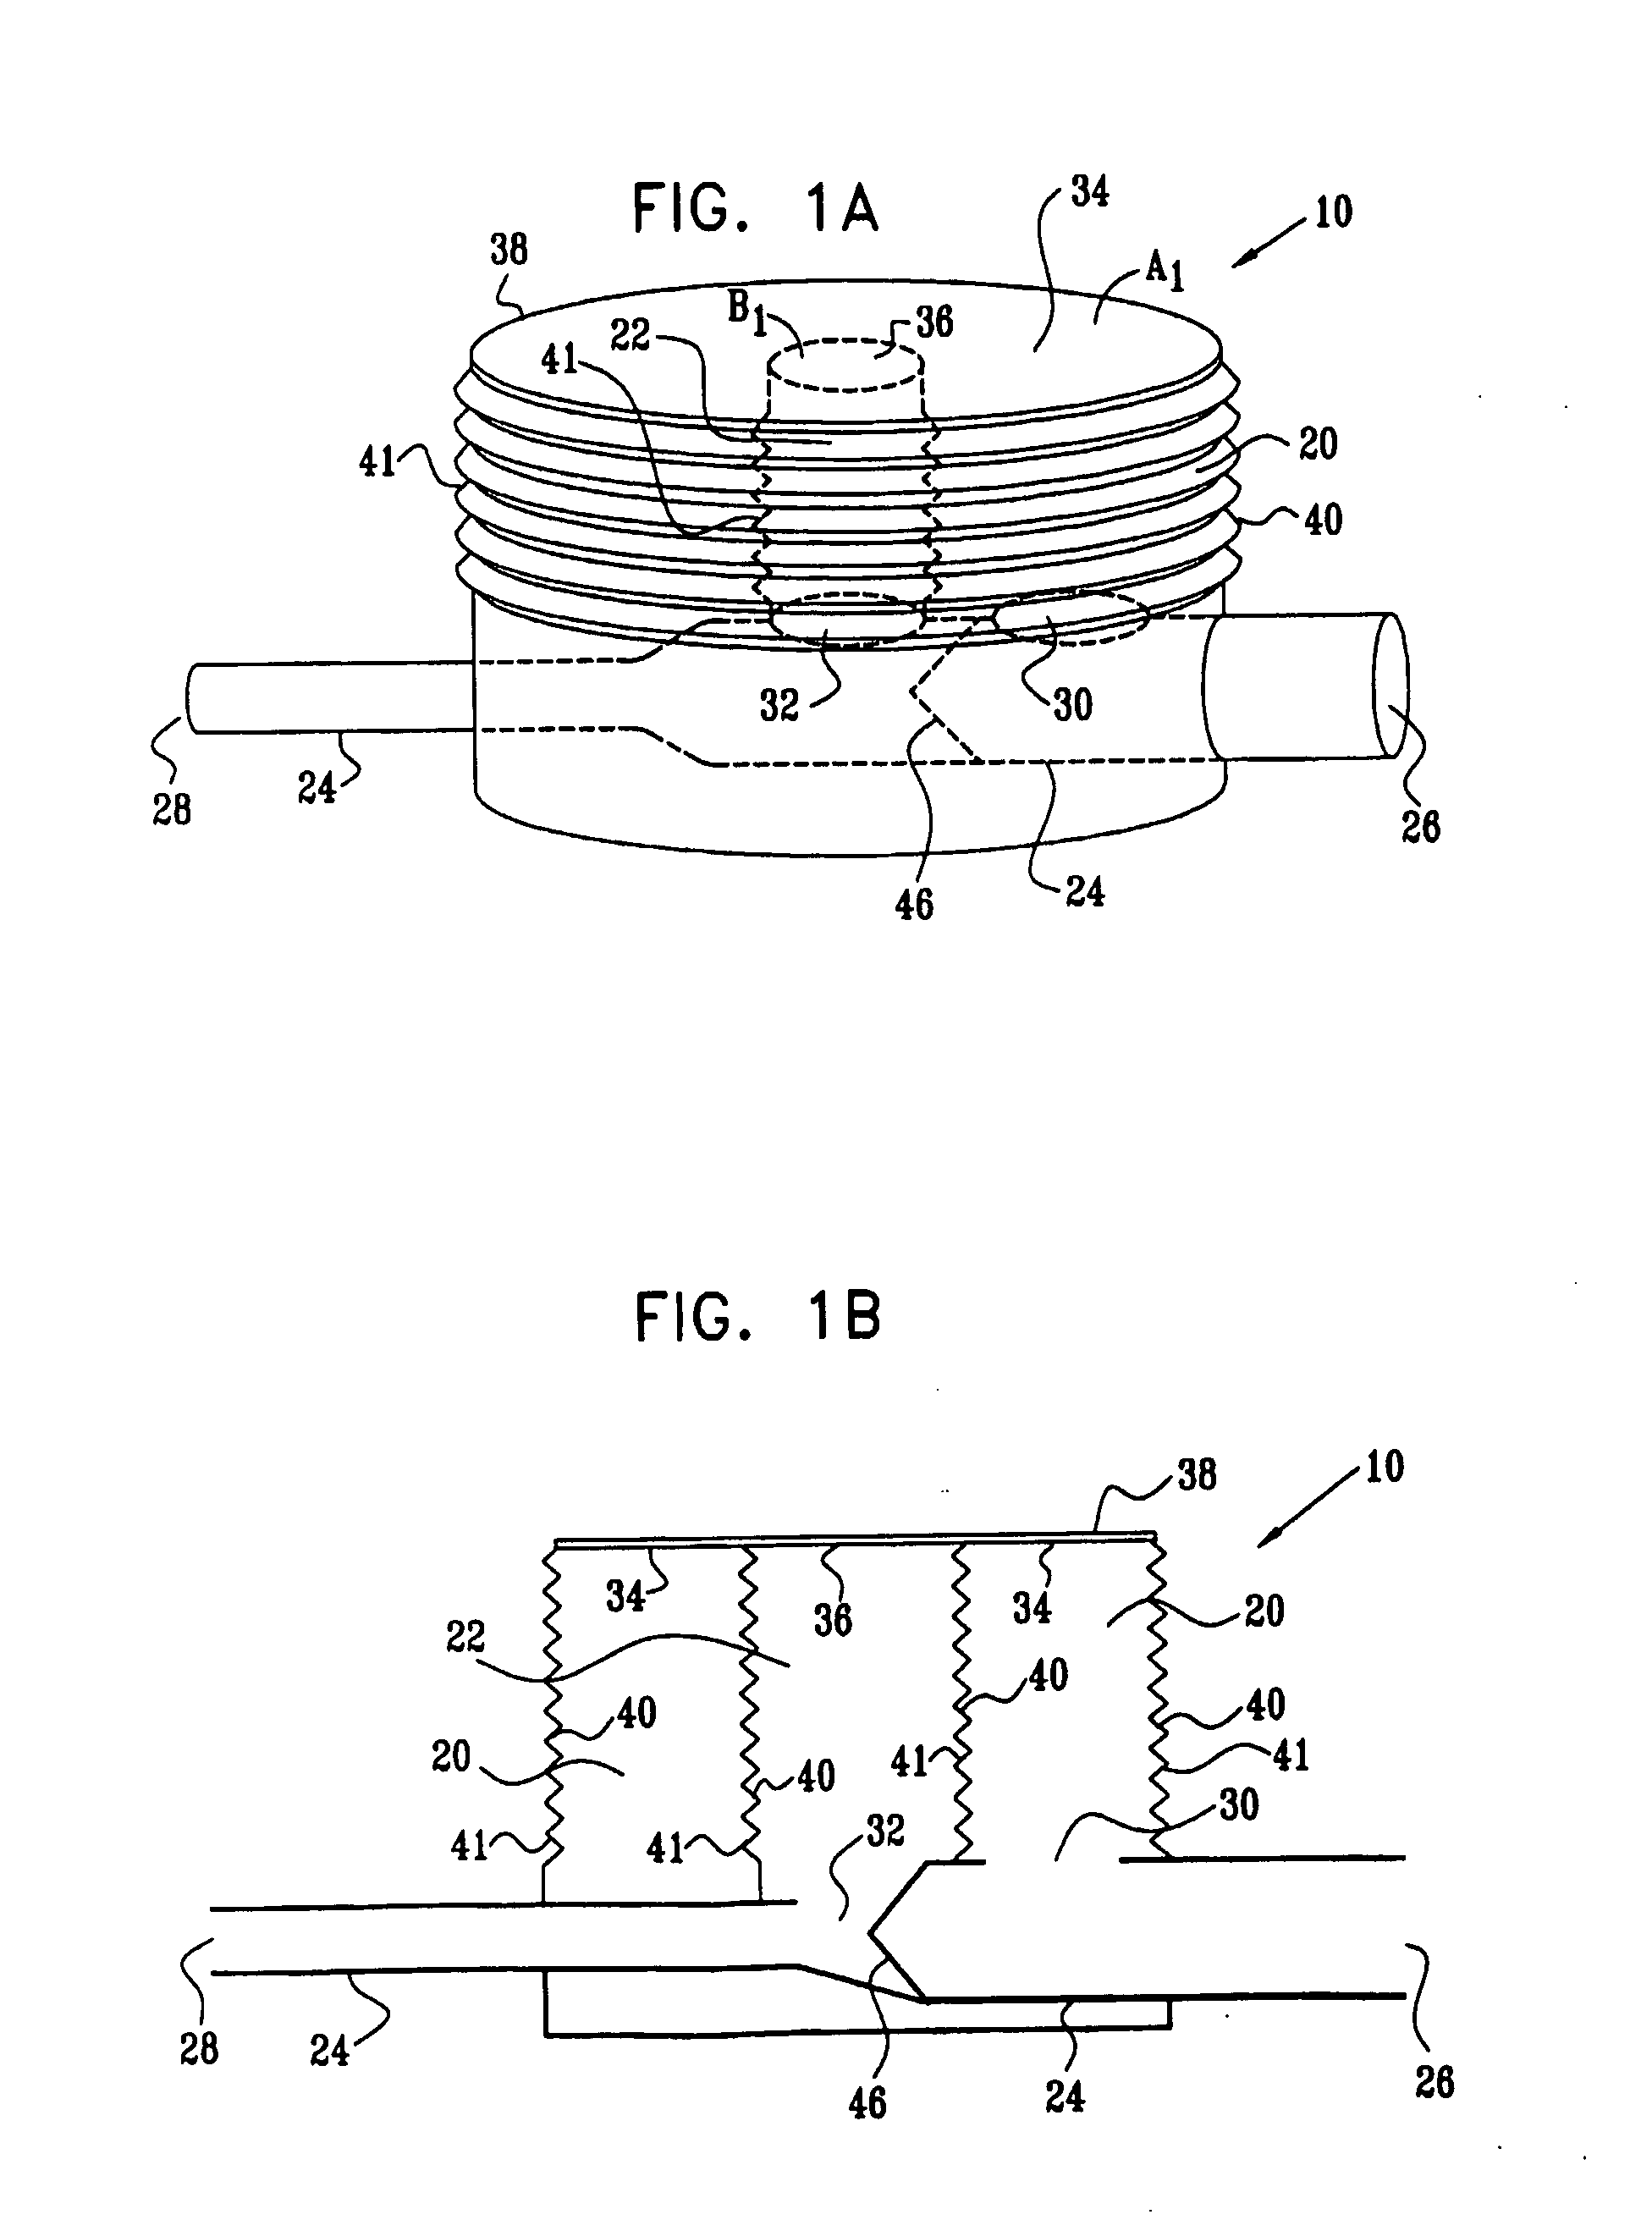 Extracardiac Blood Flow Amplification Device